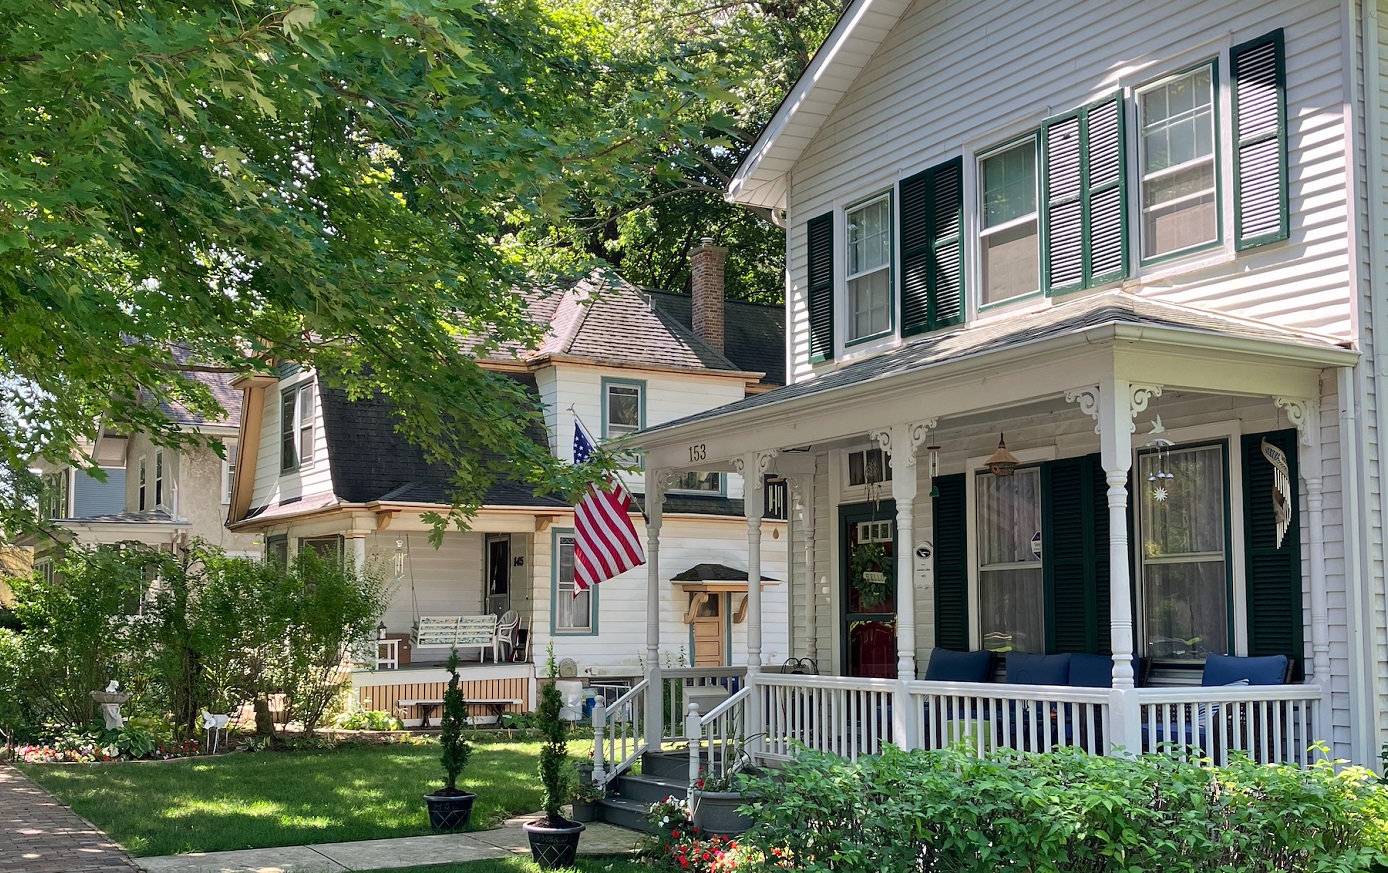 A white house with green shutters and a large front porch in Naperville's historic district displays an American flag.